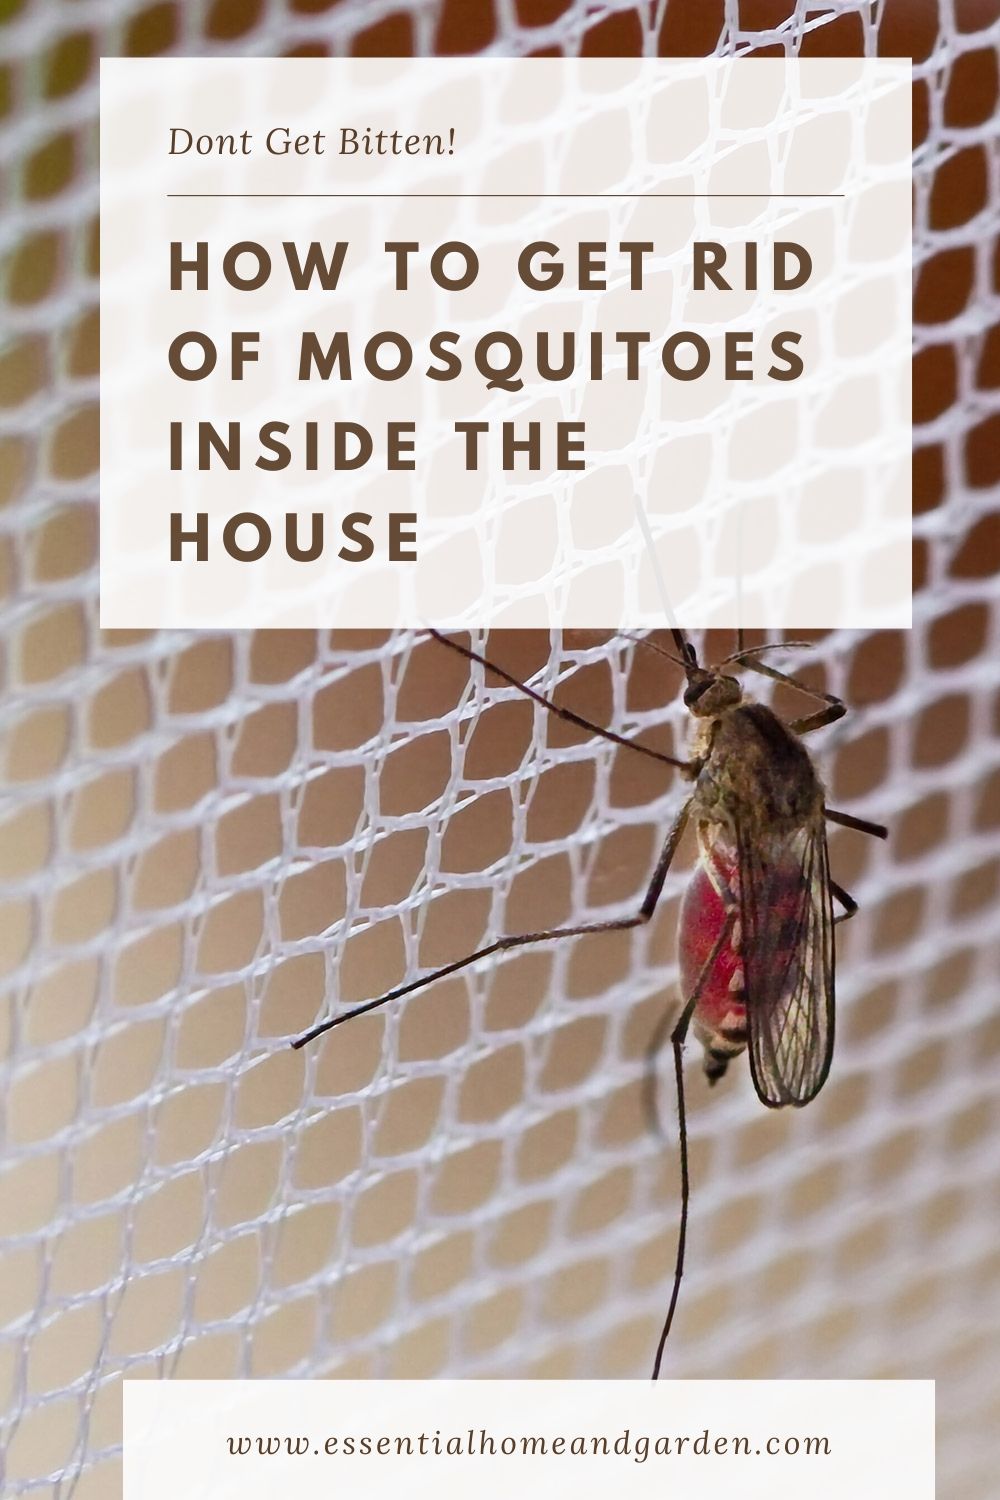 How to Get Rid of Mosquitoes Inside the House - Essential ...